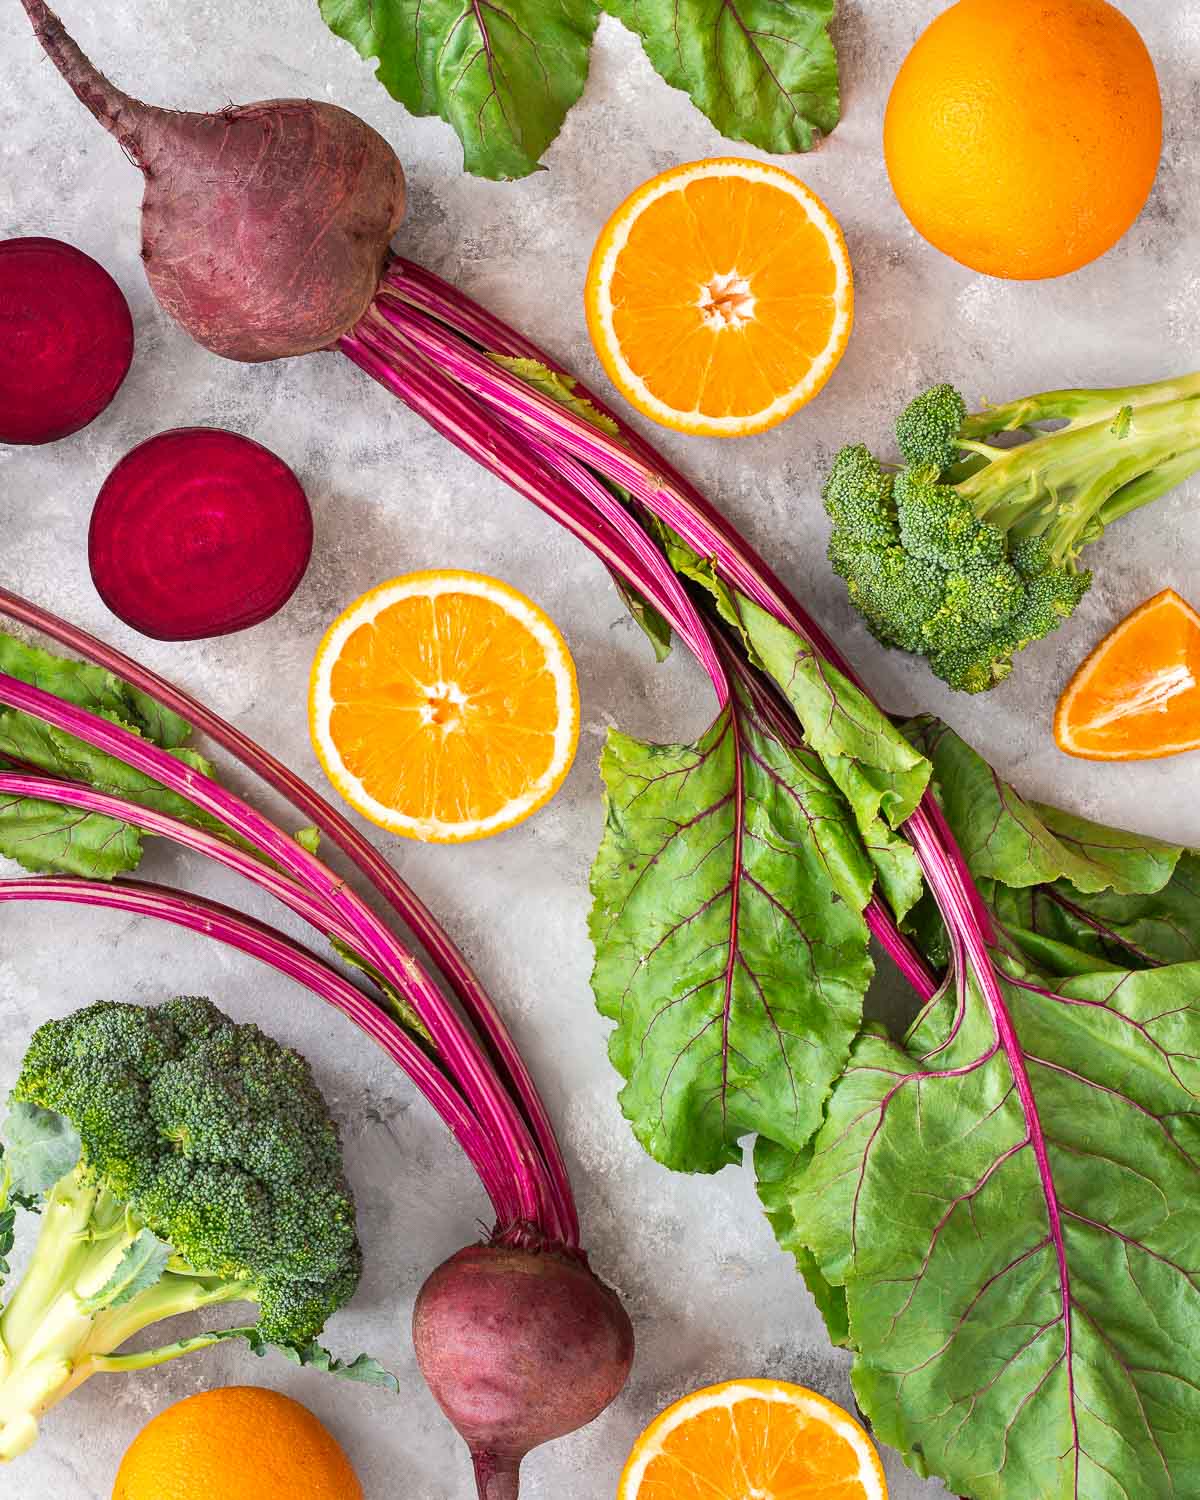 Overhead image of sliced oranges, beets and broccoli florets.